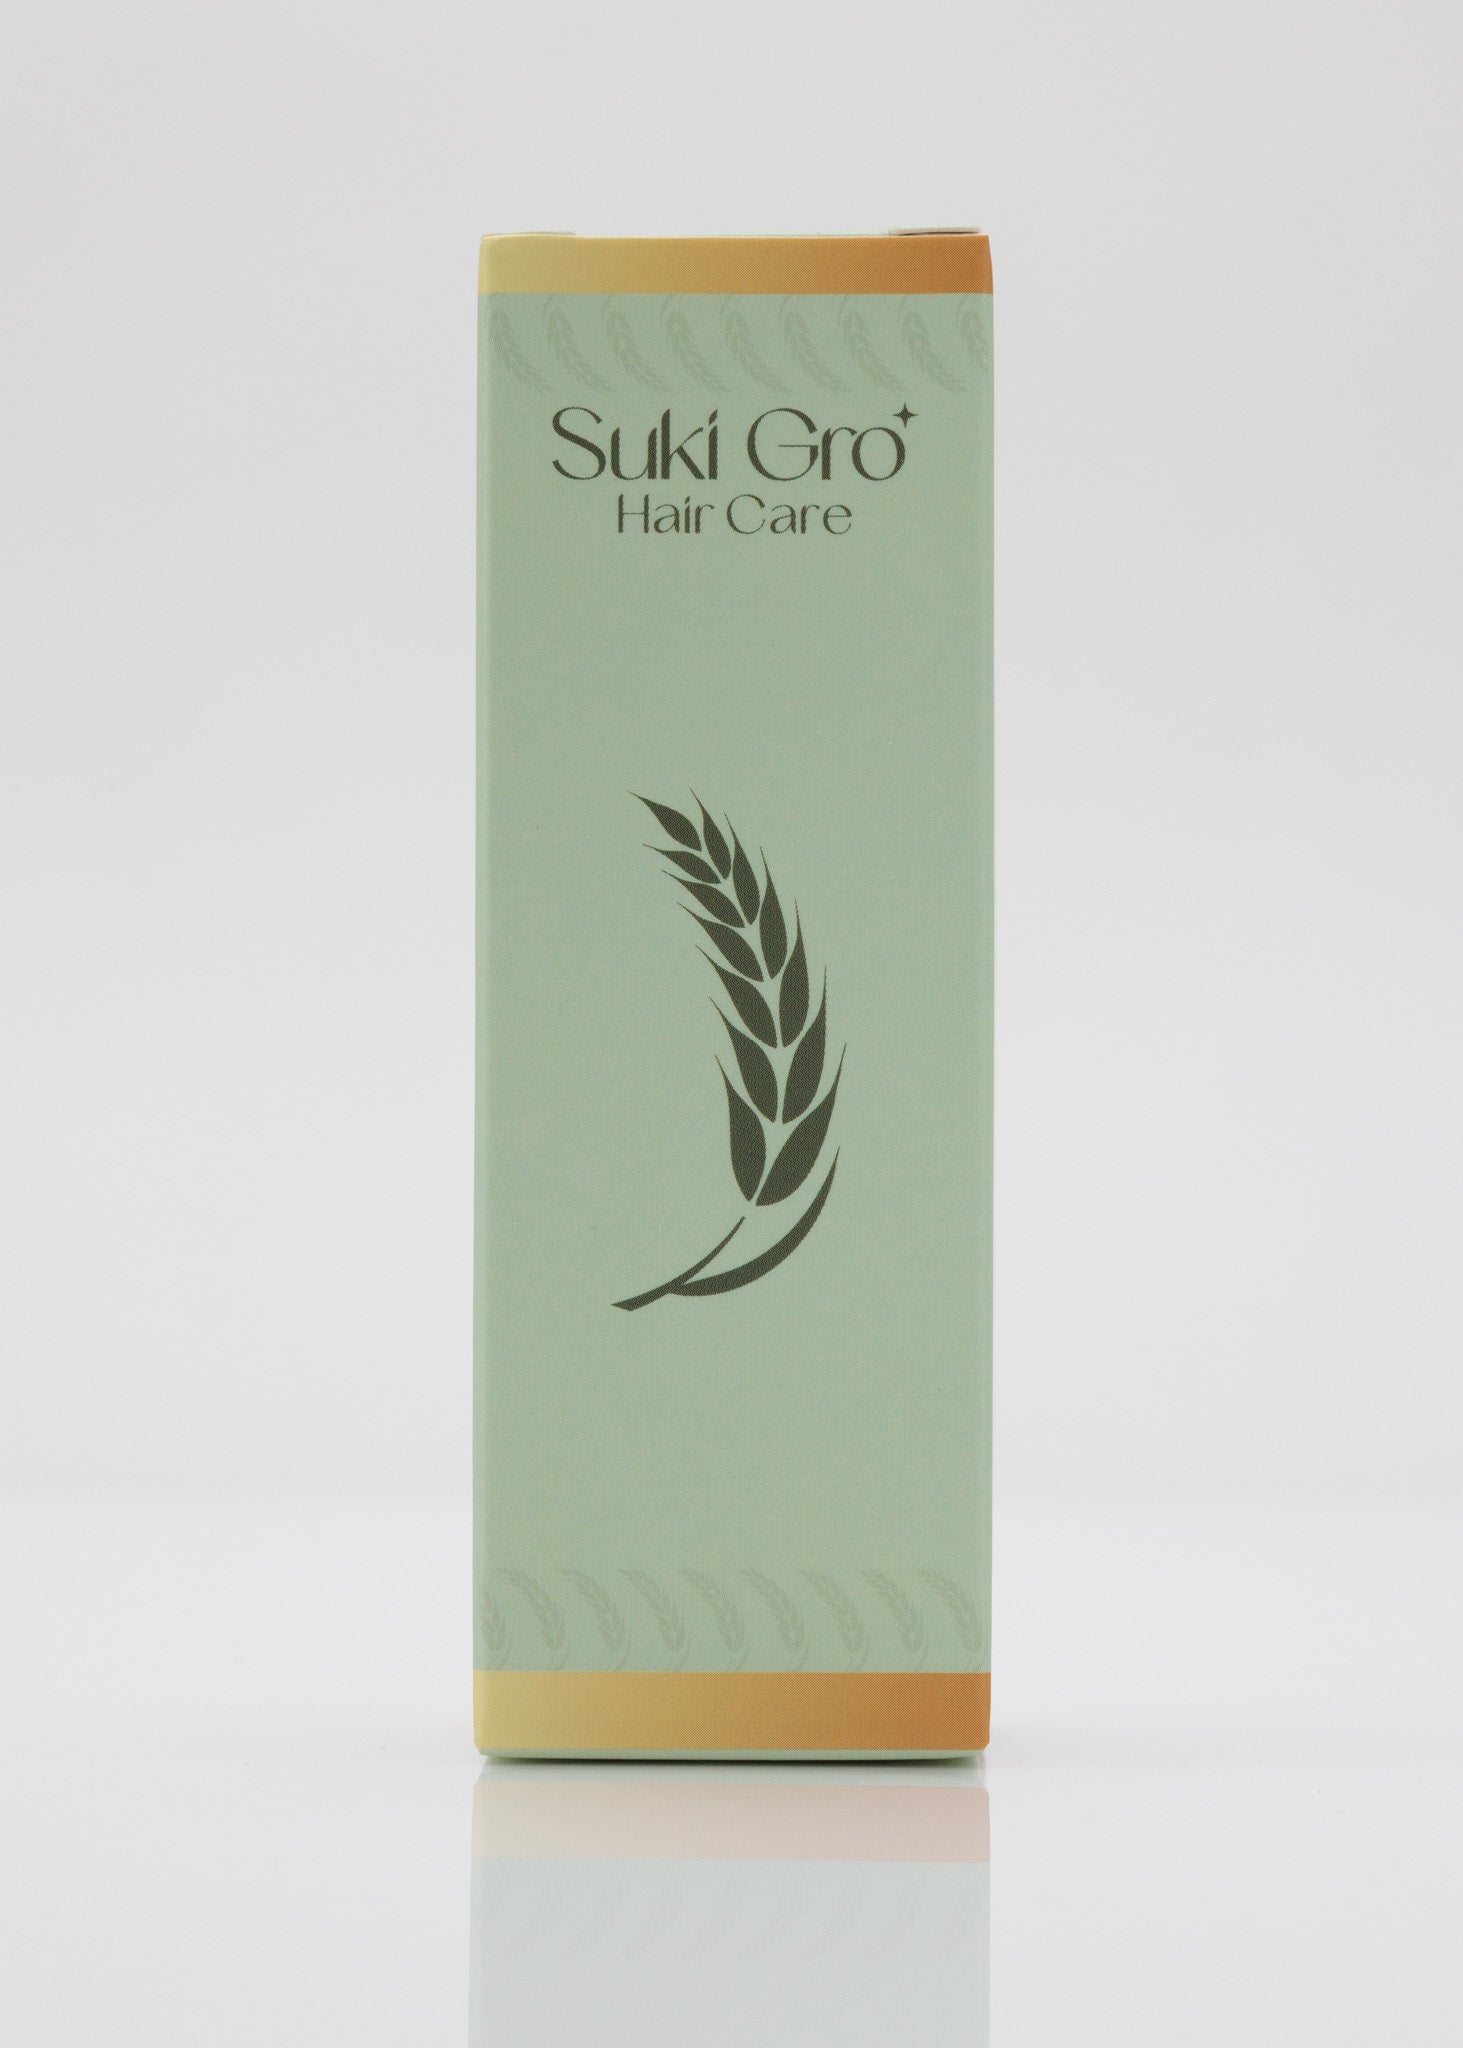 Rice Water For Hair Growth - Sukigro+